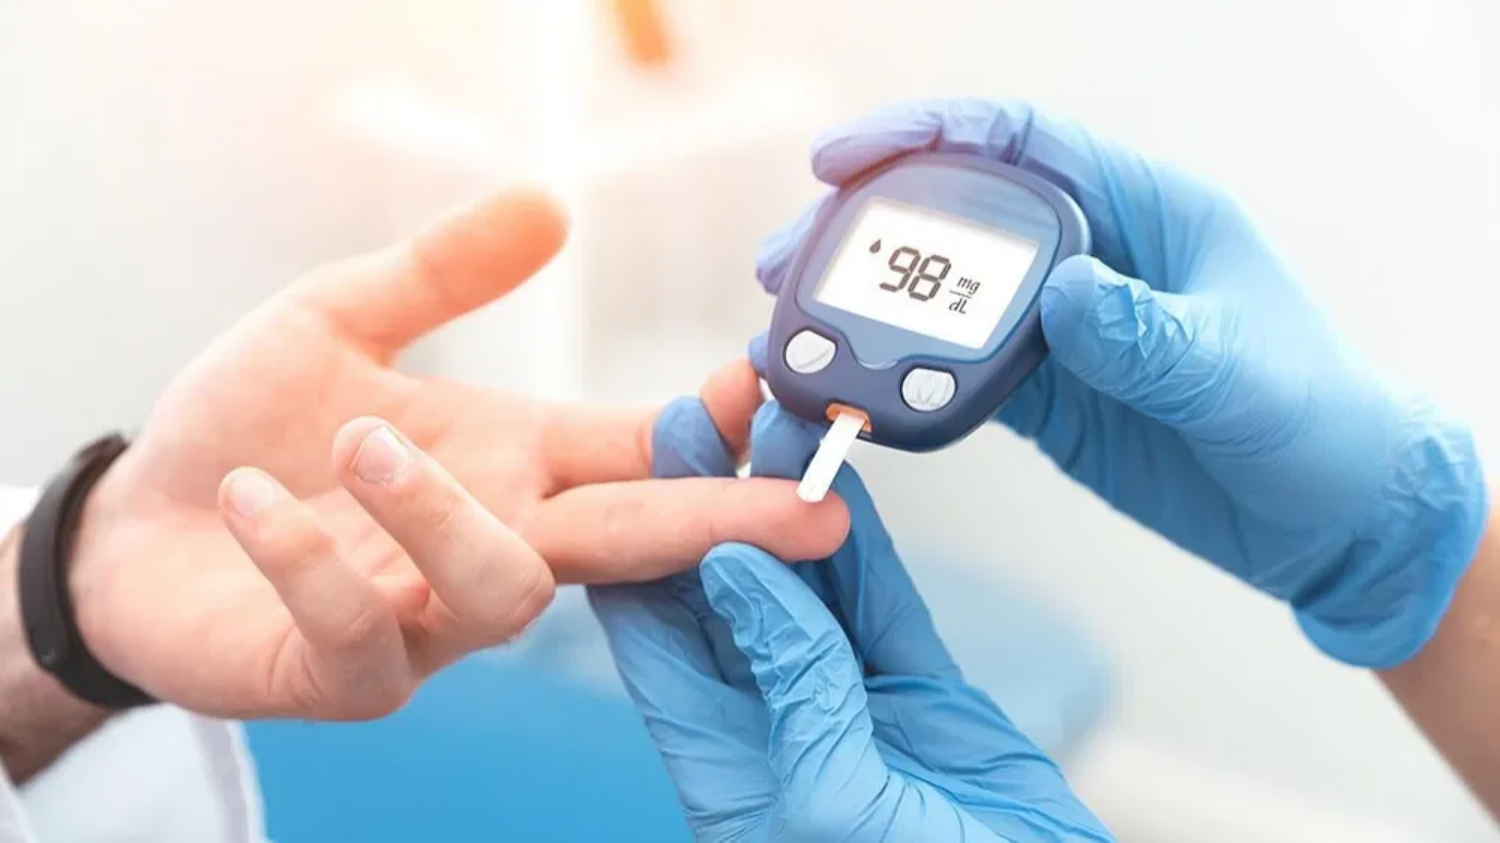 In today's age of mobile phones, blood sugar control is in your hands, learn की तस्वीर